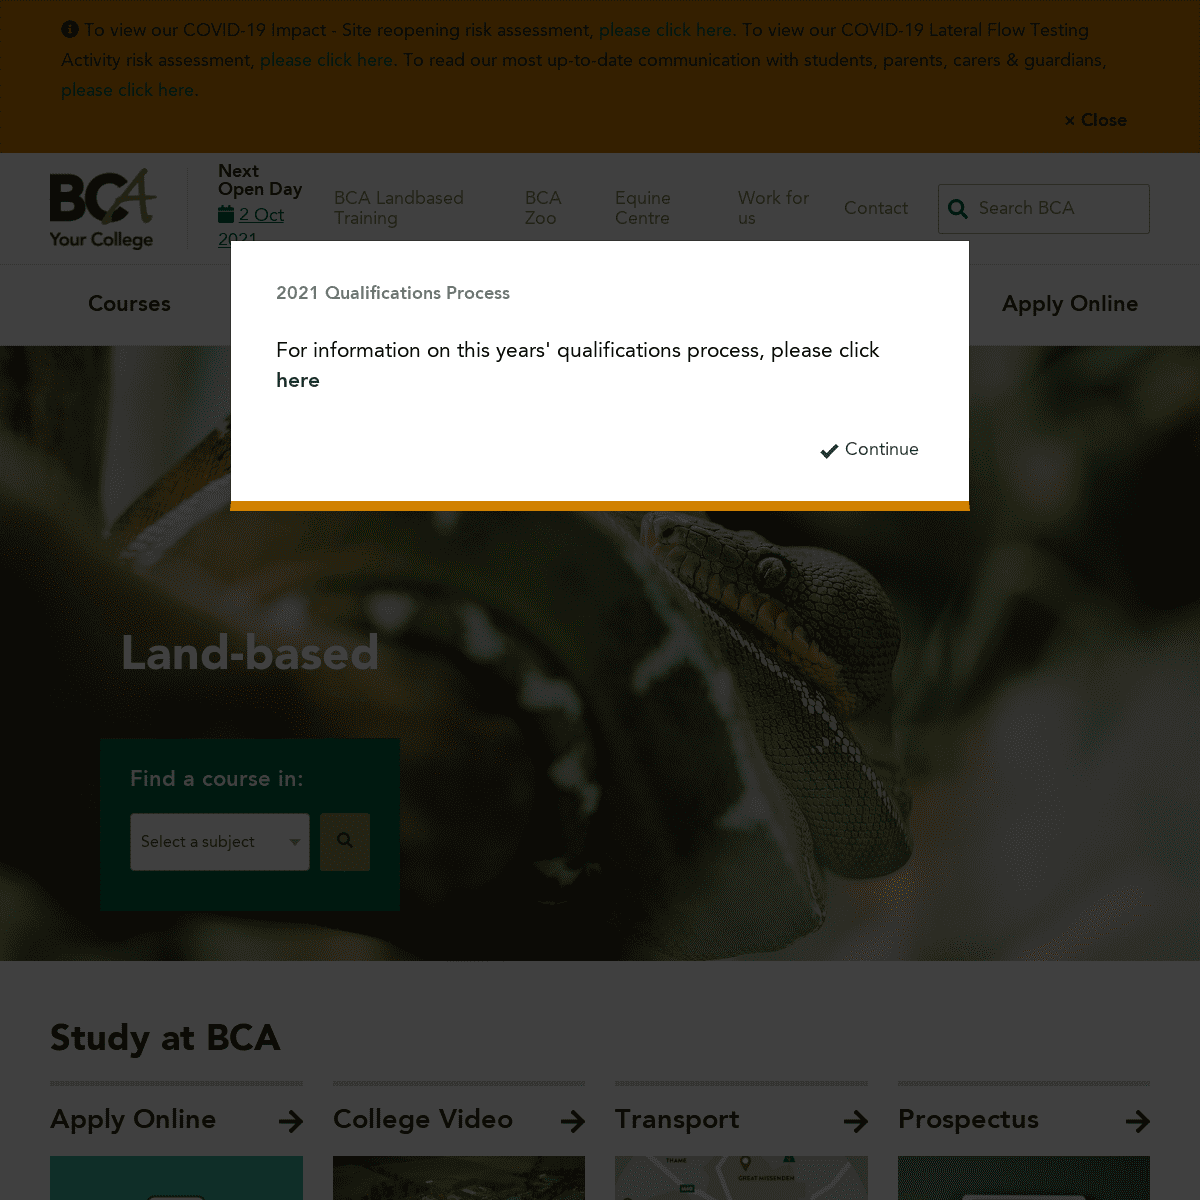 A complete backup of https://bca.ac.uk